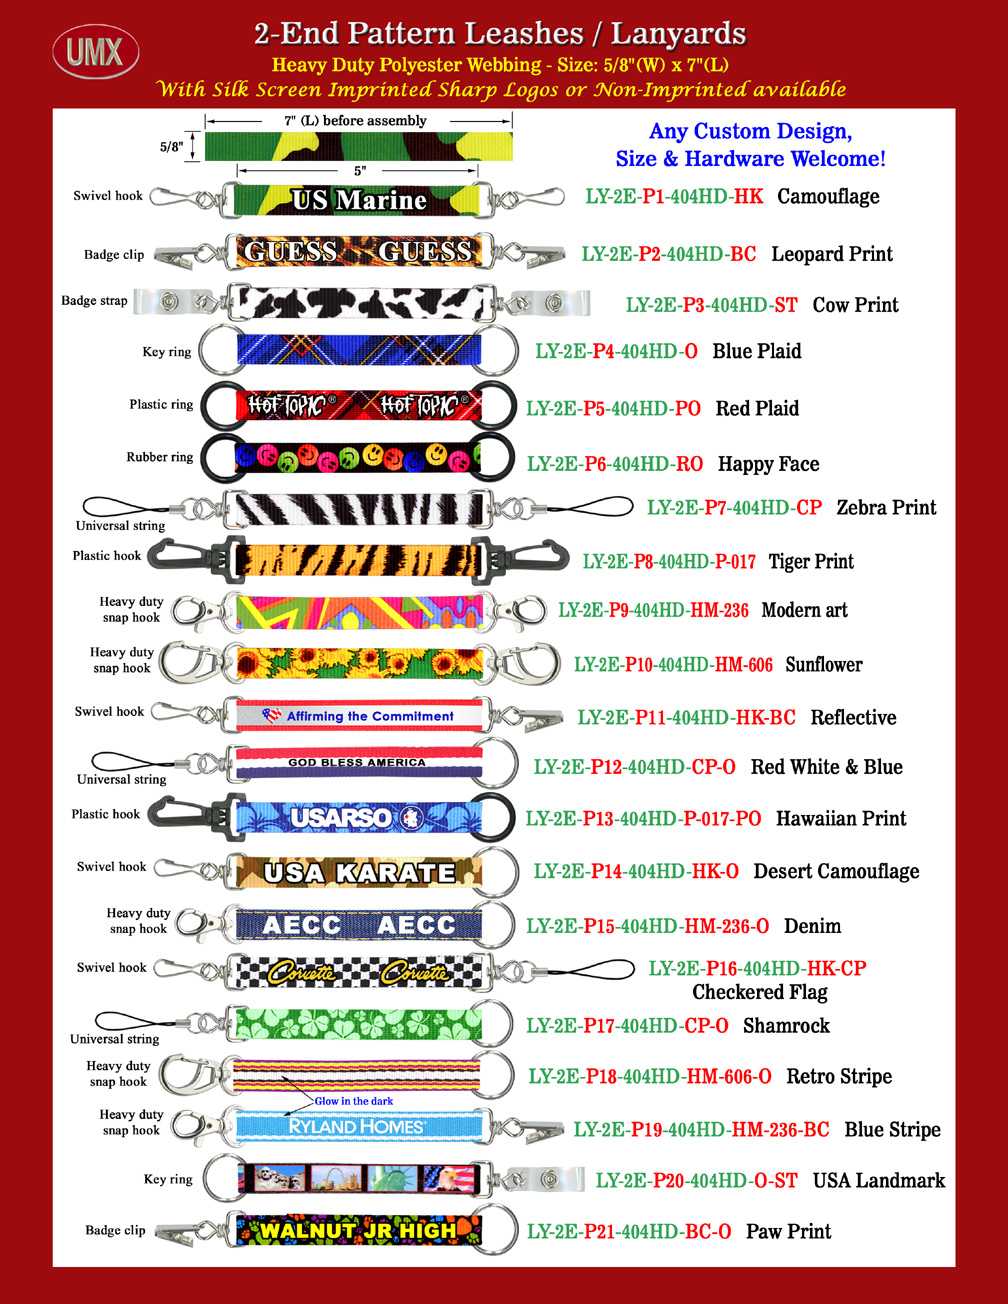 You are viewing Lanyards > Leash > Multiple-End > Custom Designed or Custom Printed Pattern Leashes or Lanyards With Sewn-On Attachments With Non-Custom-Imprinted or Custom-Imprinted Models Available.